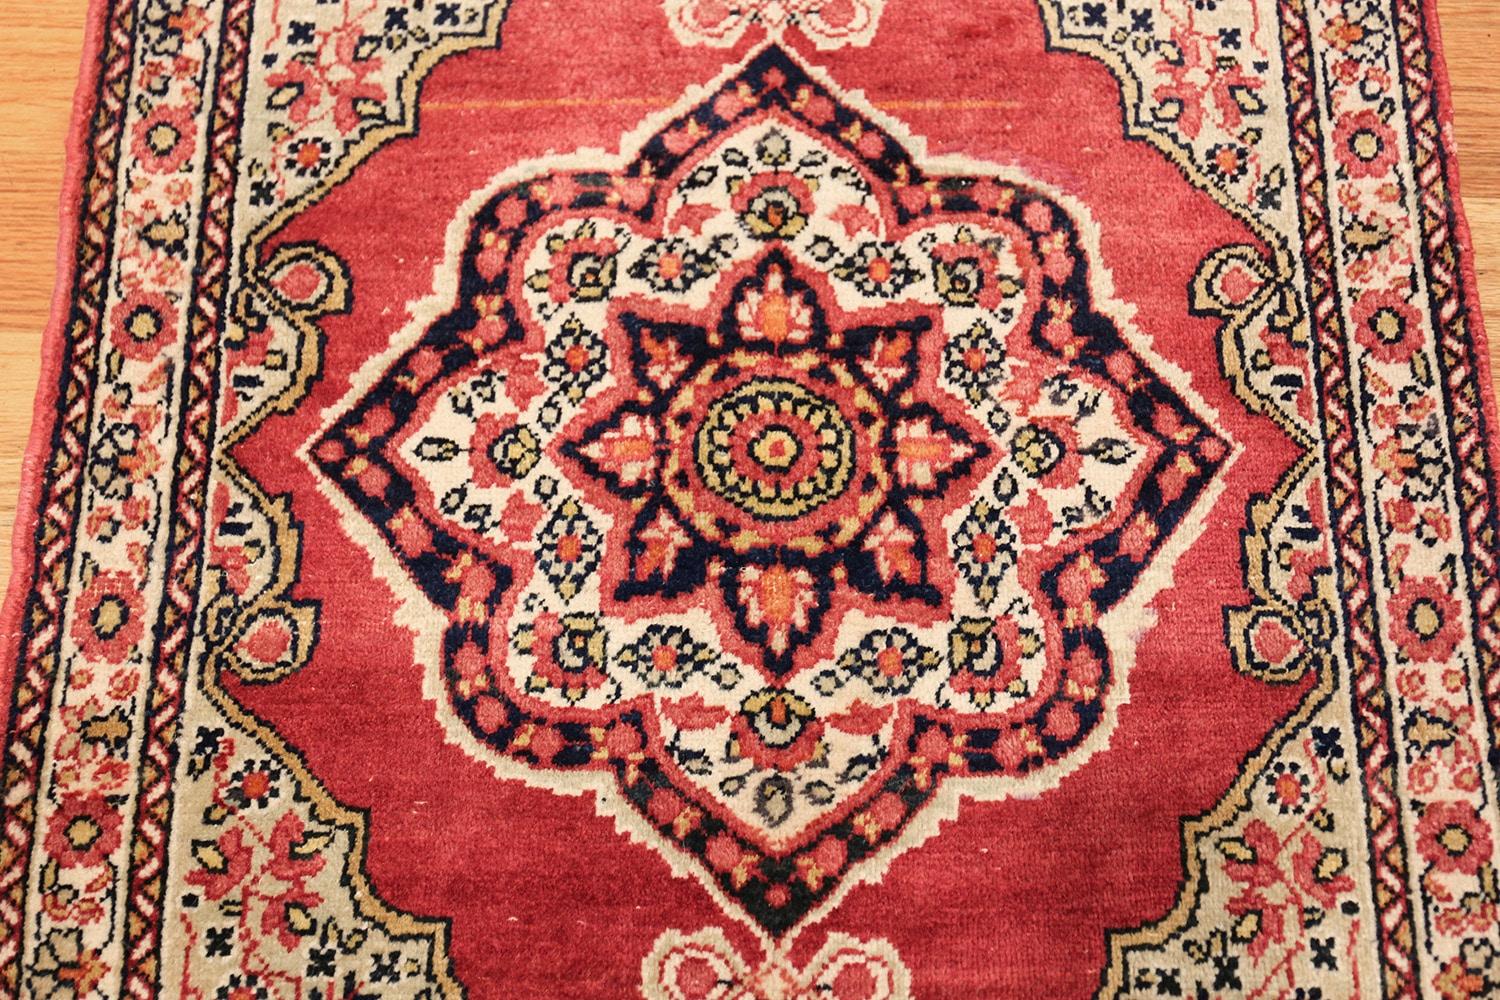 Wool Small Mat Size Antique Persian Kerman Floral Rug. Size: 1 ft 10 in x 2 ft 6 in